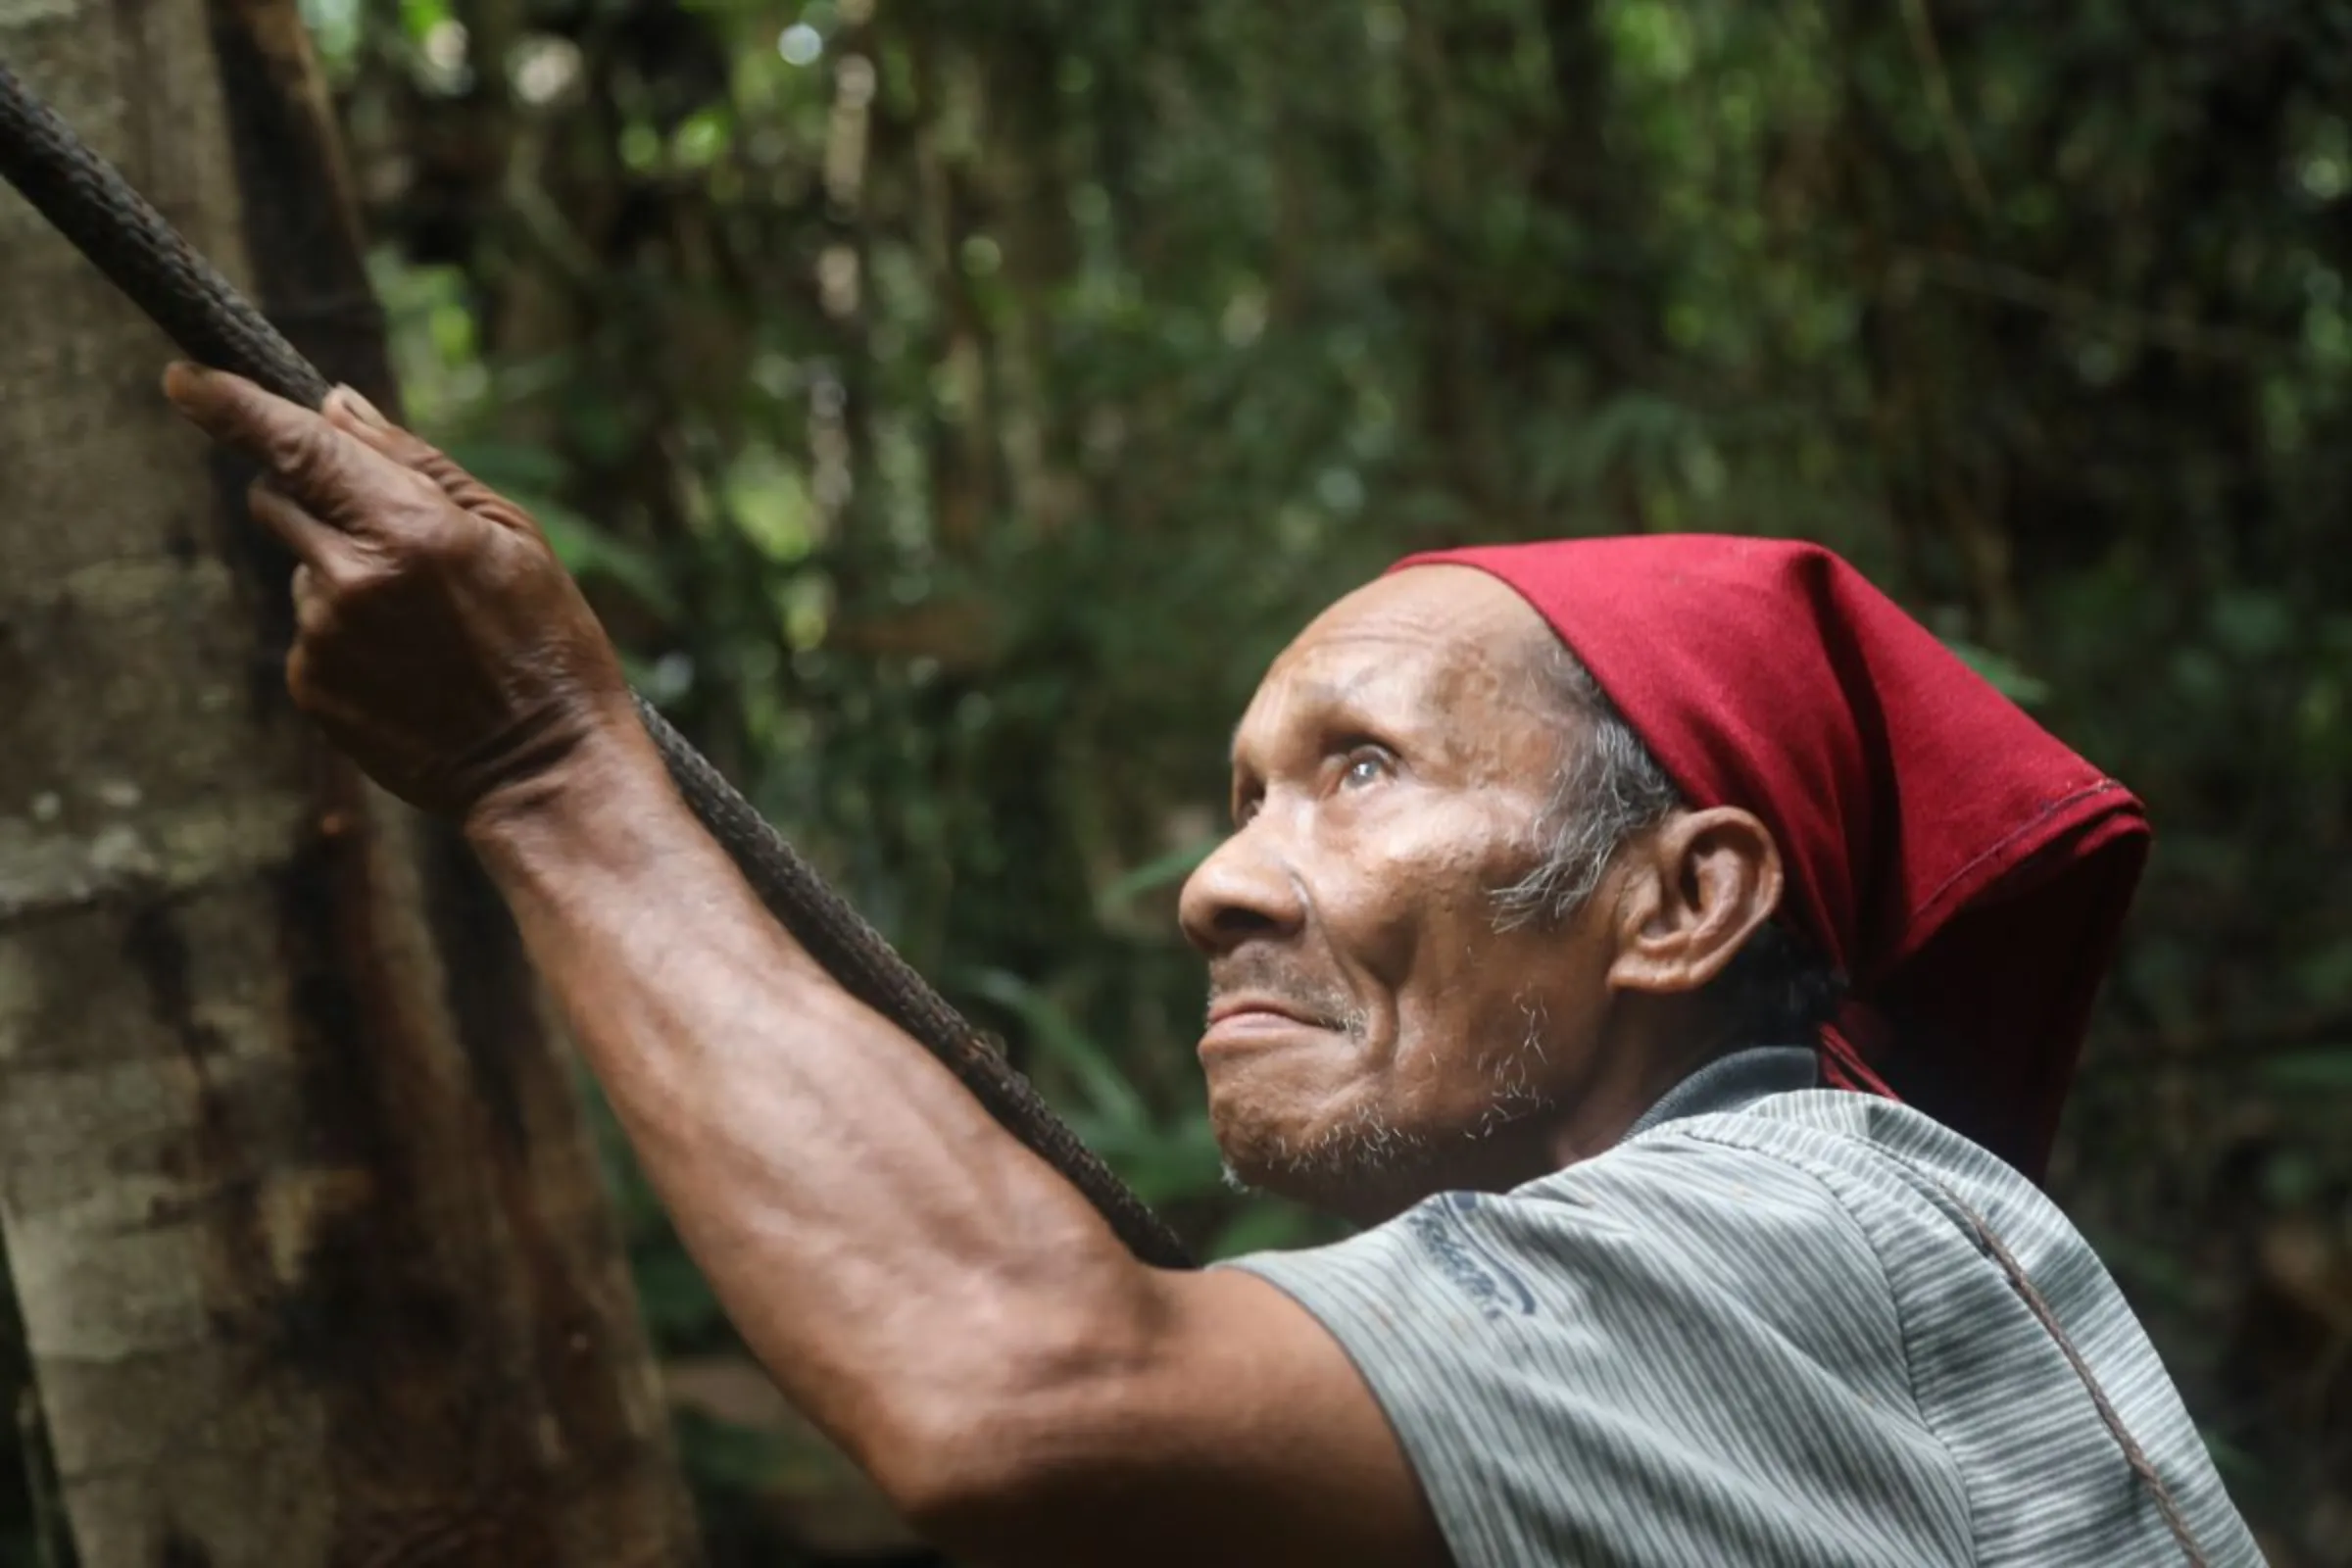 Mino Nente, an elder of the Indigenous Wana people, holding a wooden blowpipe in North Morowali Regency on the Indonesian island of Sulawesi on March 12, 2023. Thomson Reuters Foundation/Peter Yeung